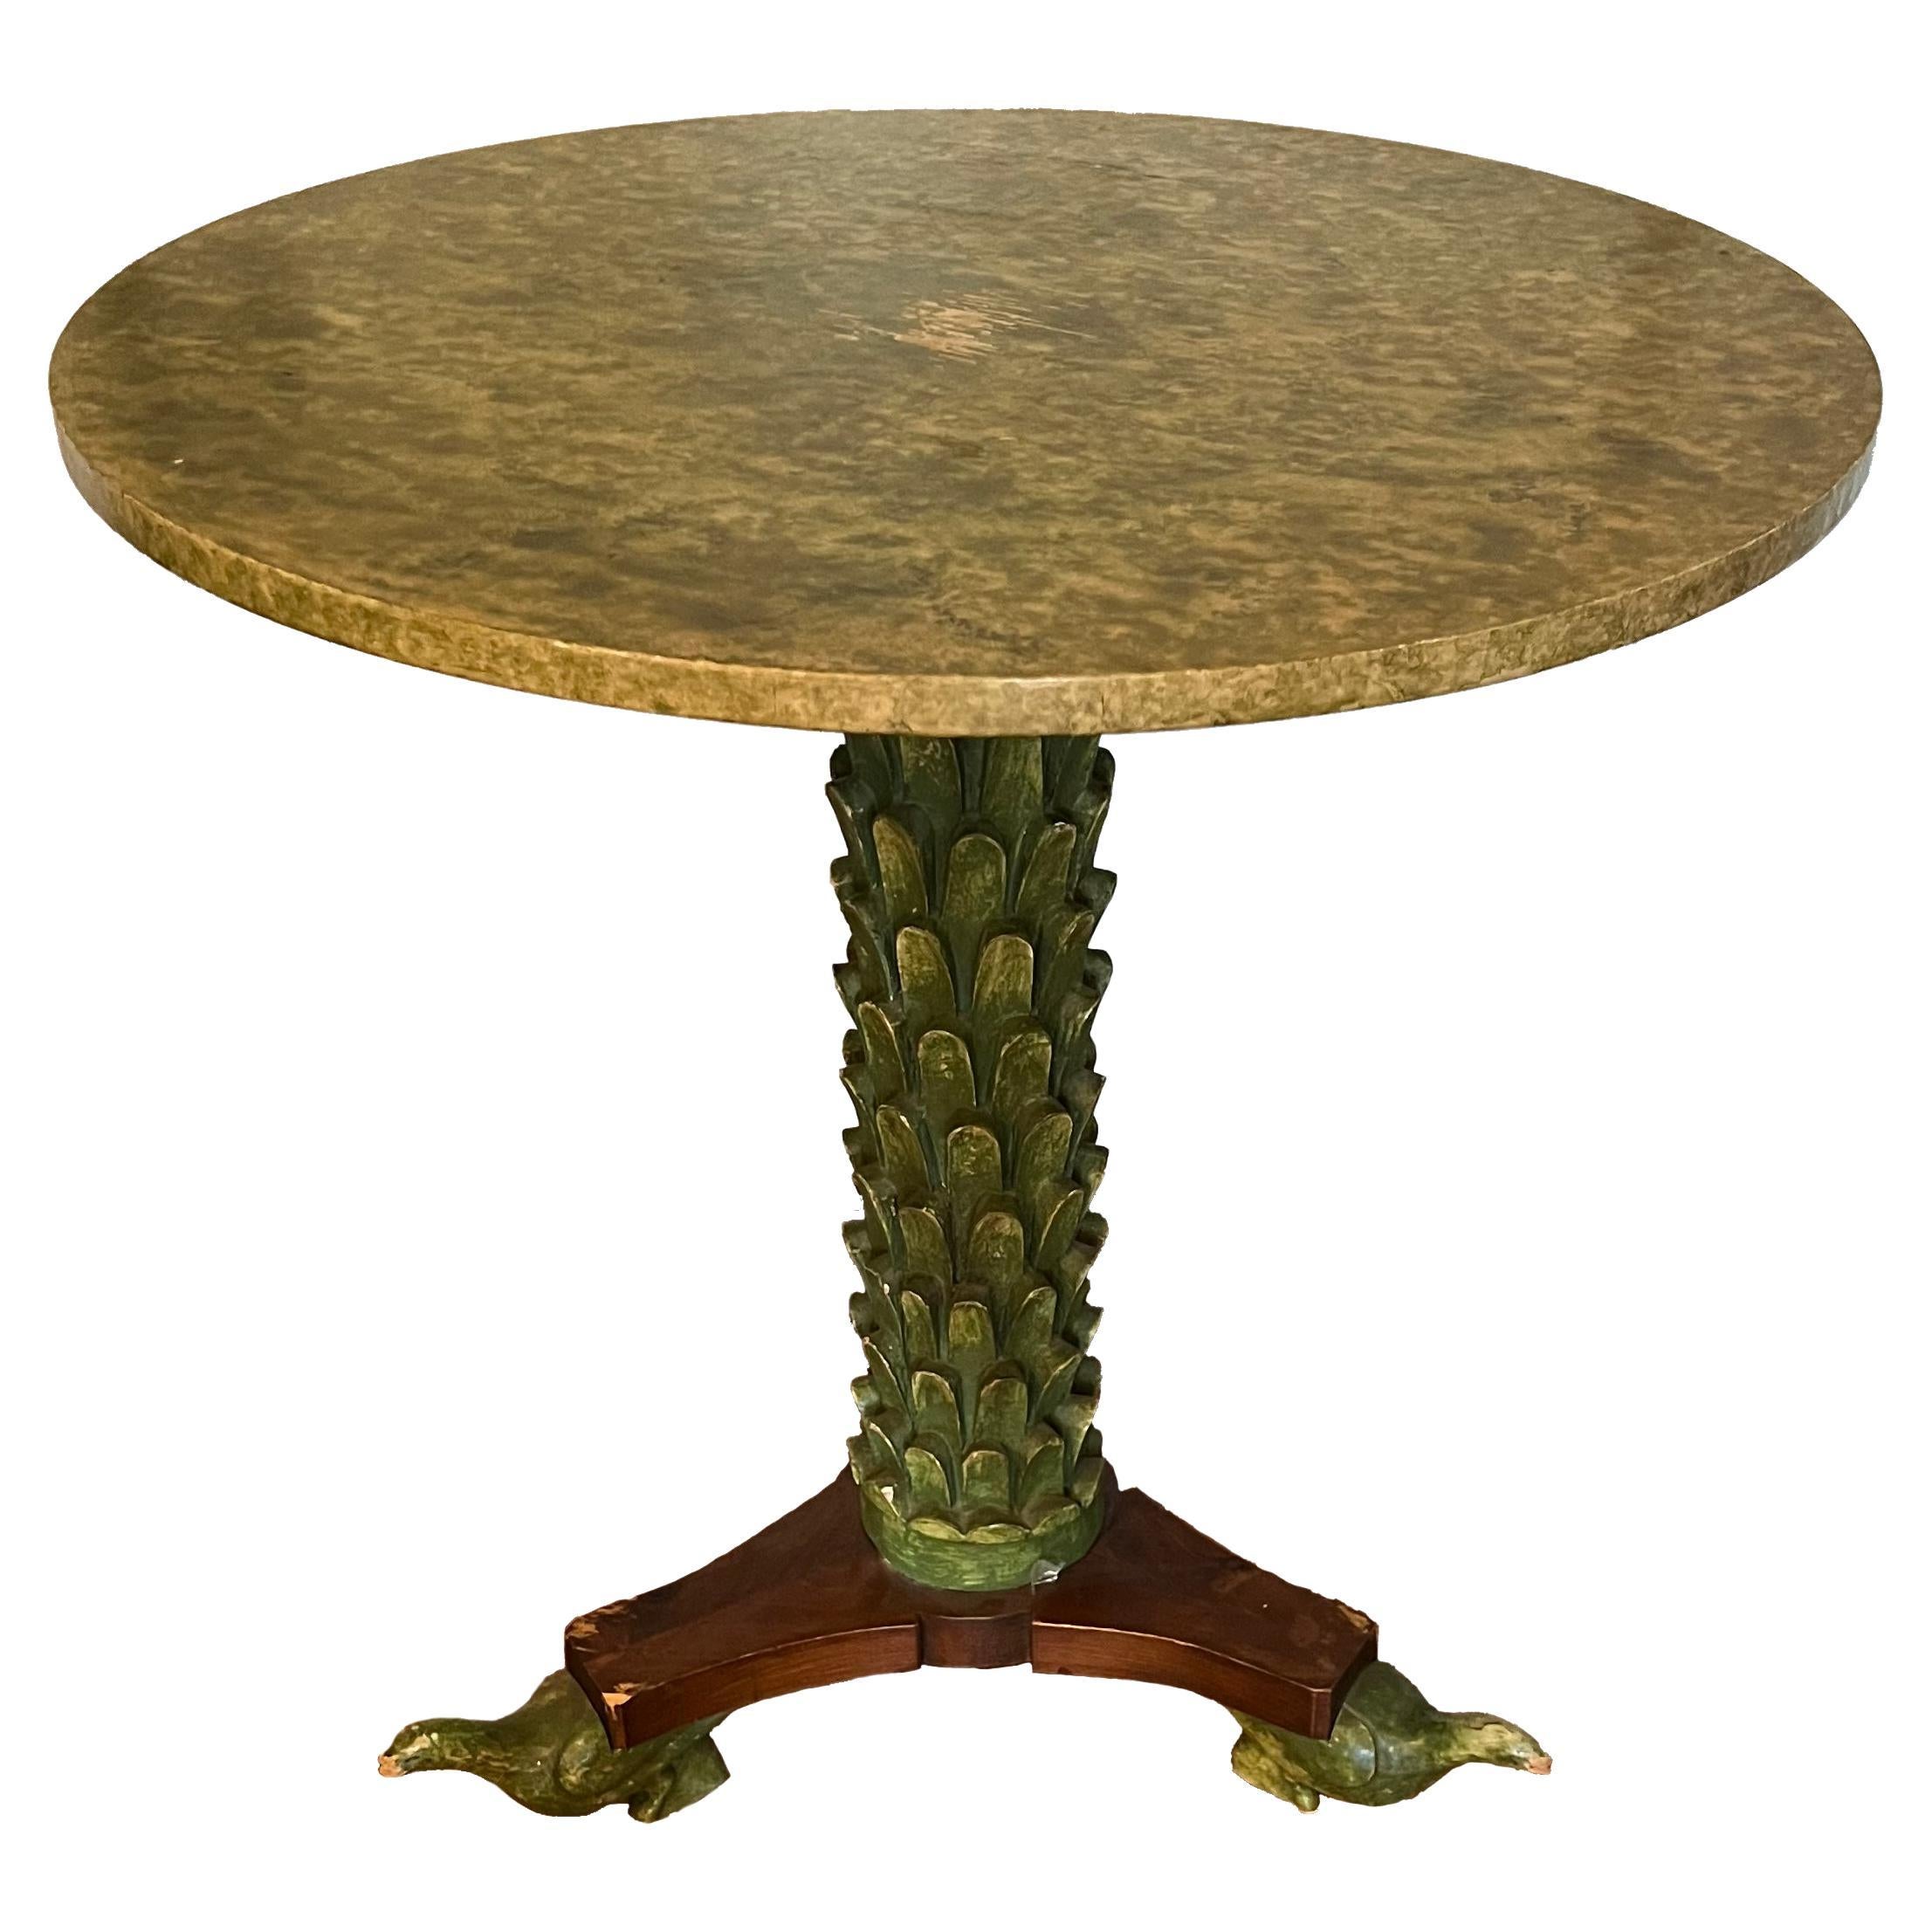 1970s Italian Palmette Pedestal Base with Carved Bird Feet and Marbleized Top 